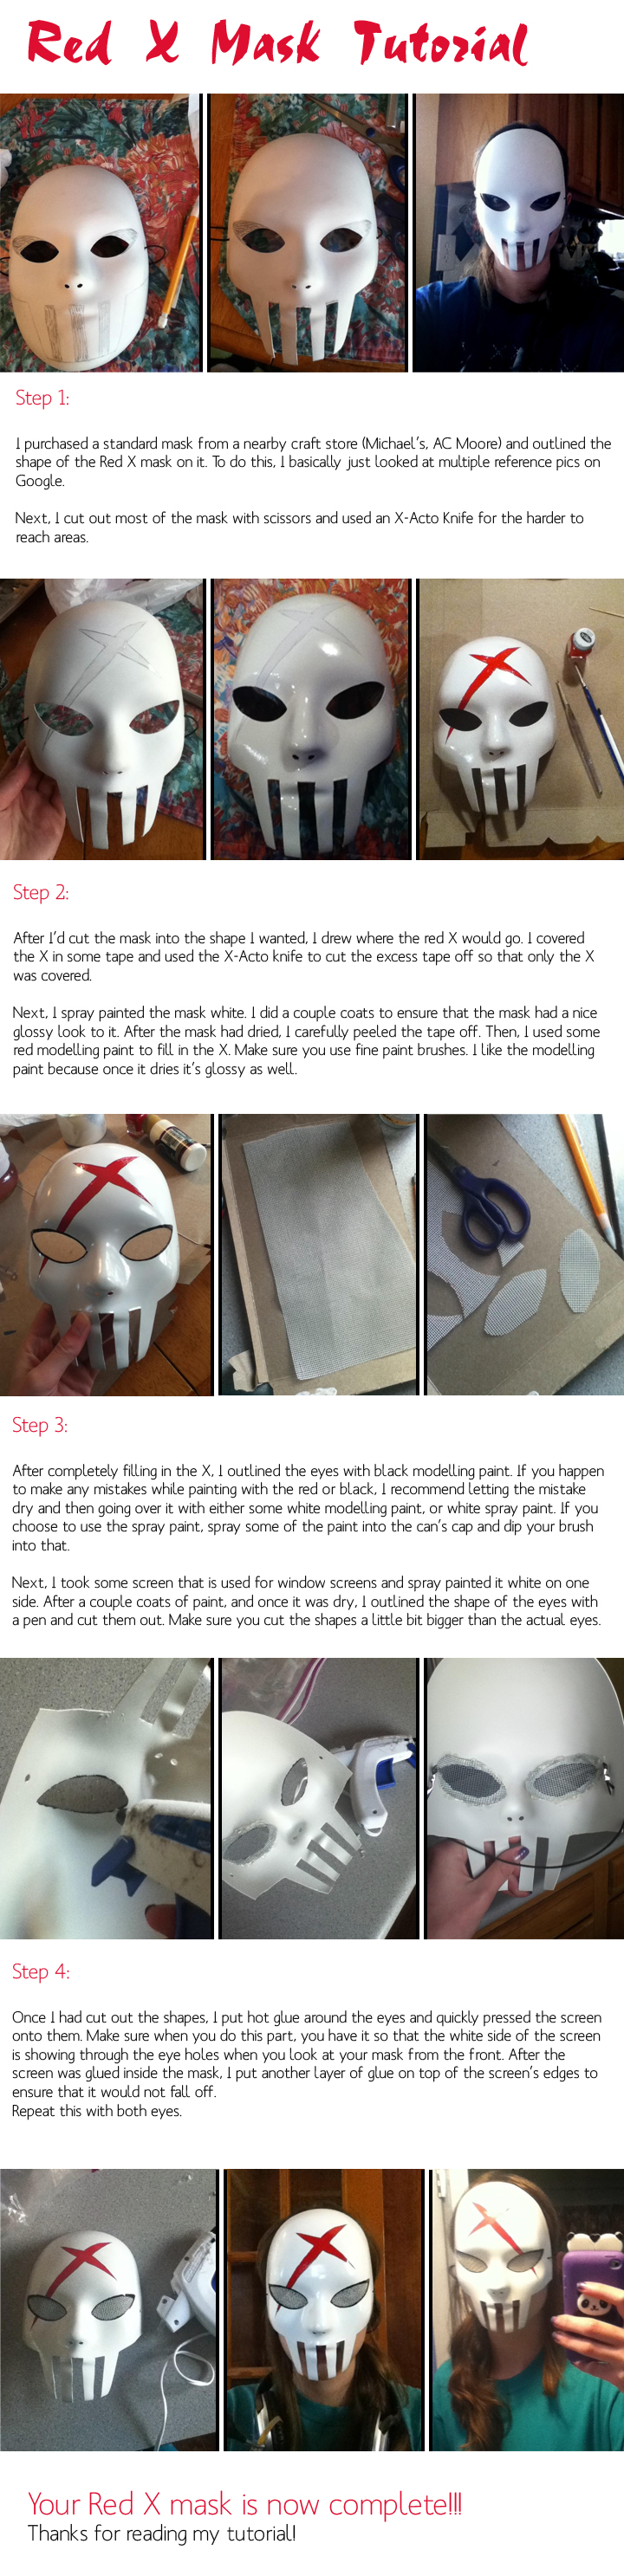 Red X Mask Tutorial